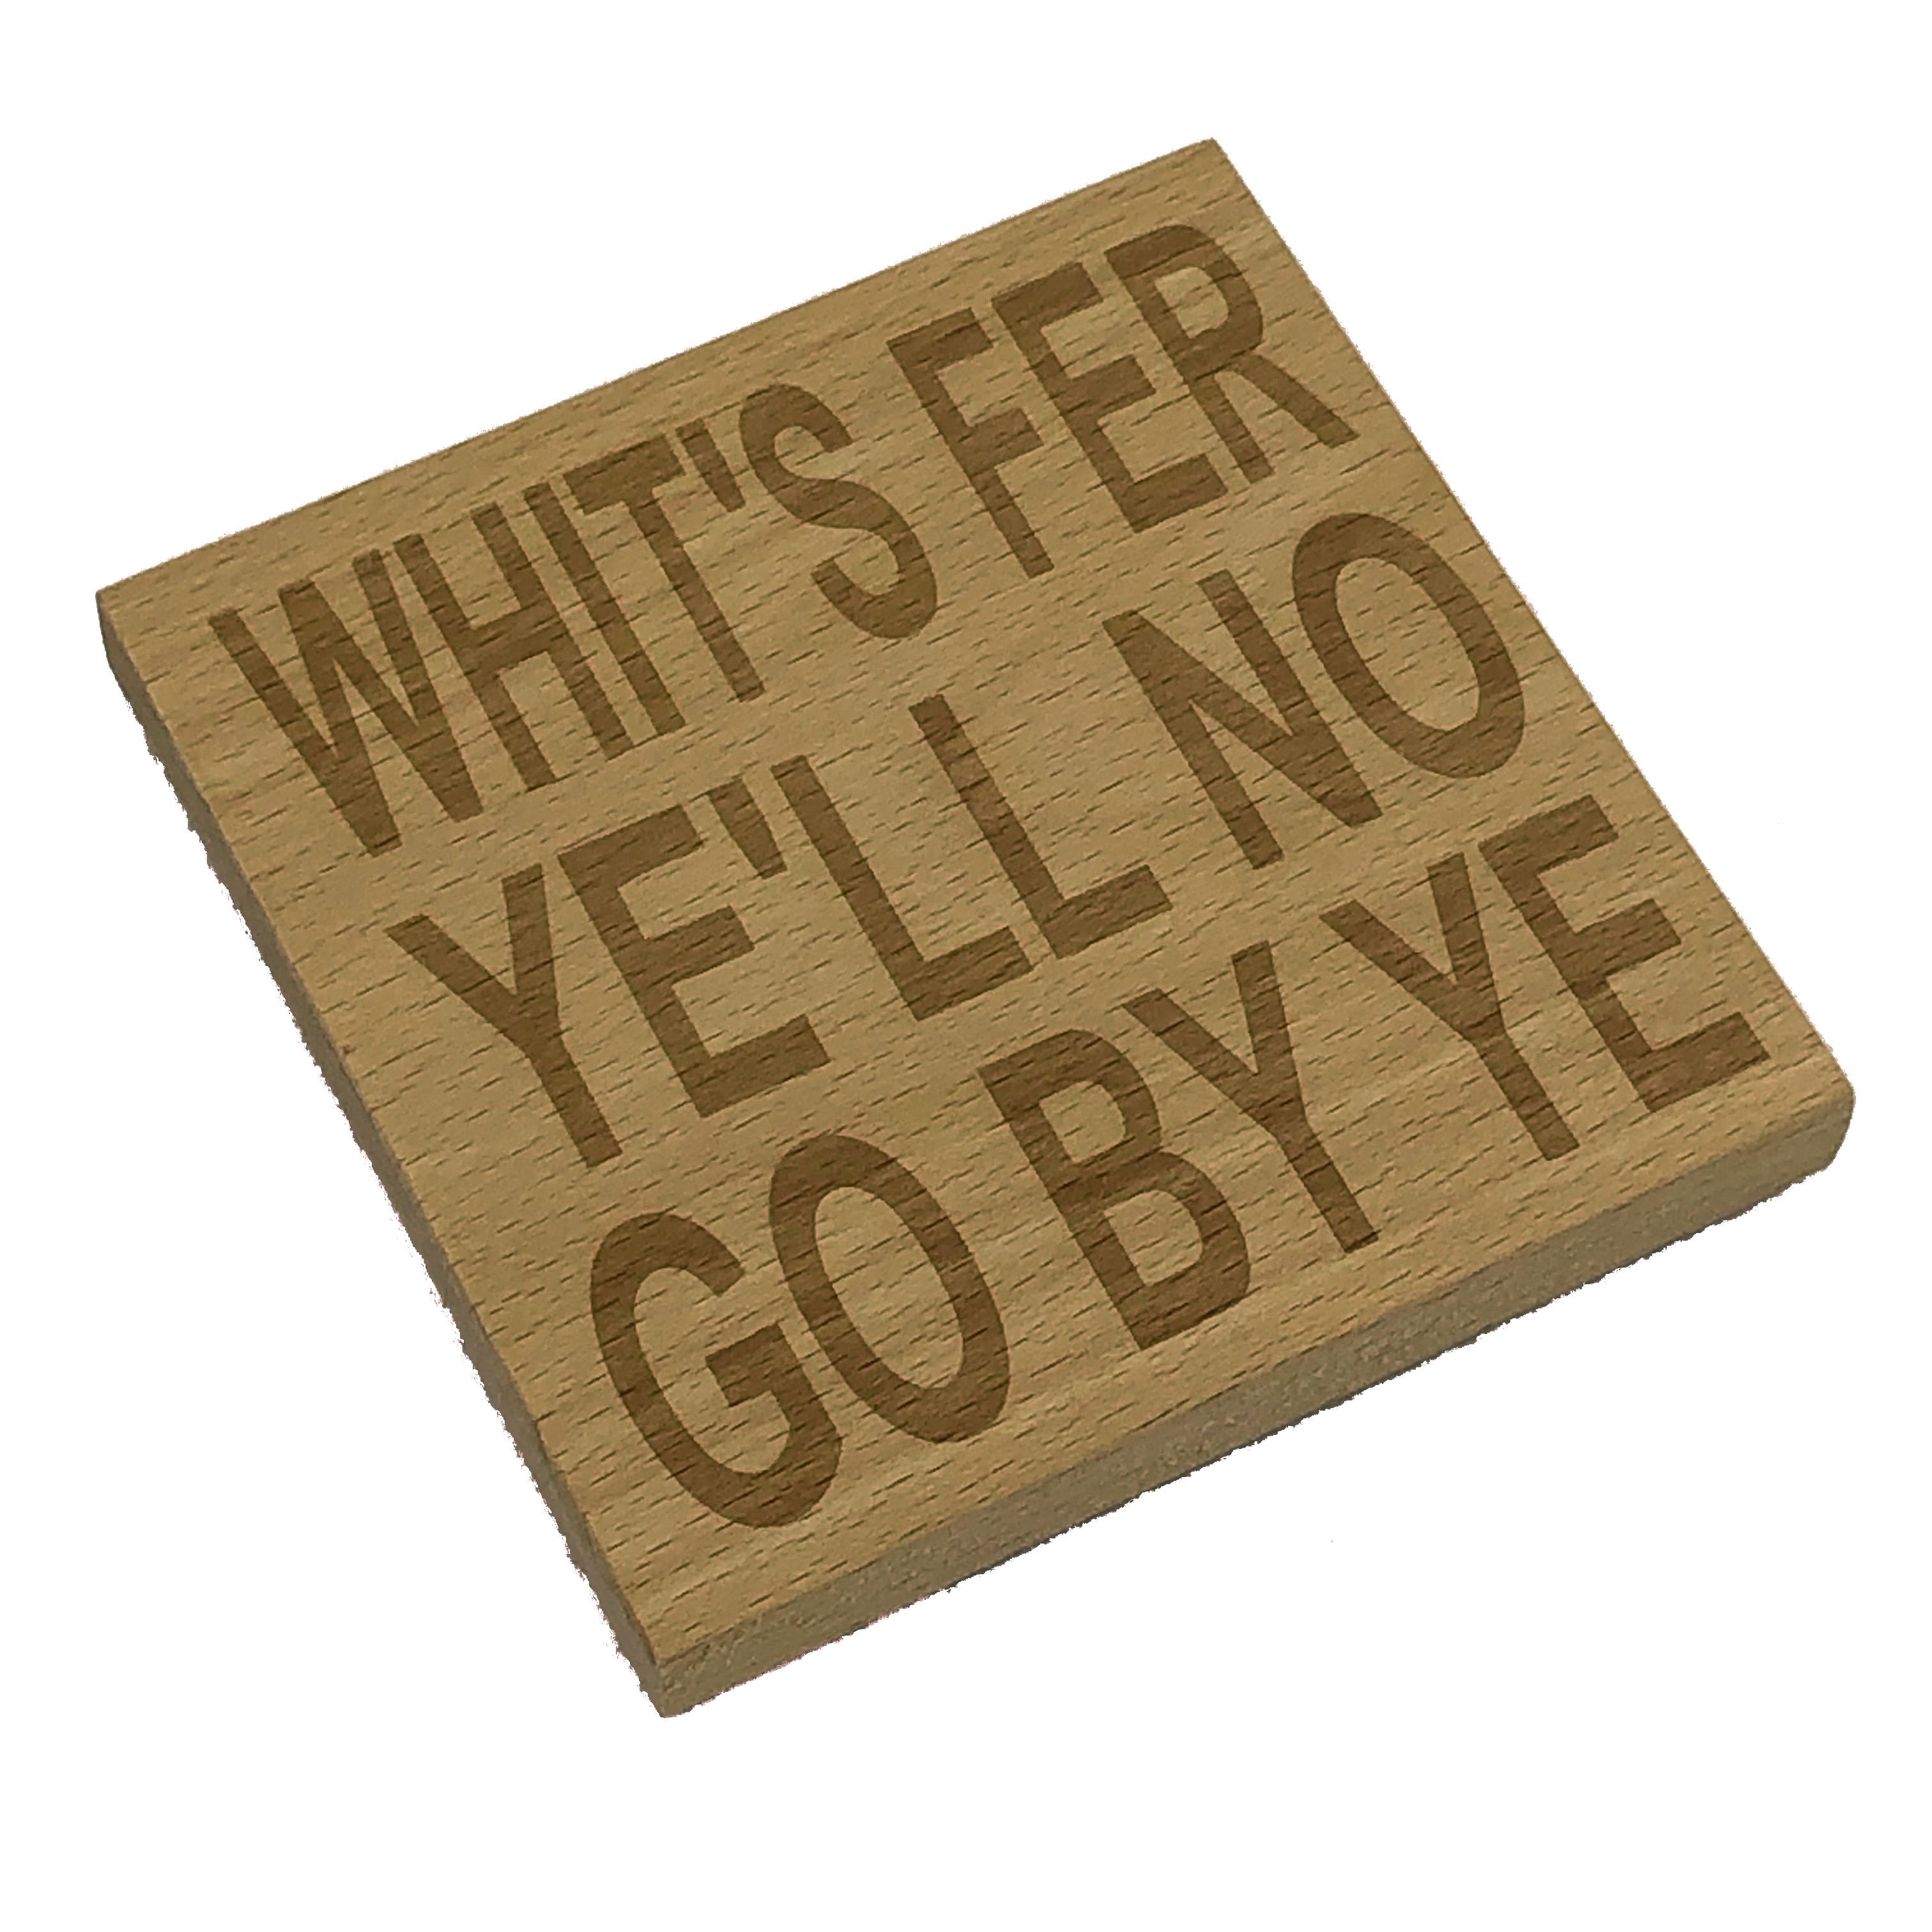 Wooden coaster gift - Scottish dialect - whit's fer ye'll no go by ye